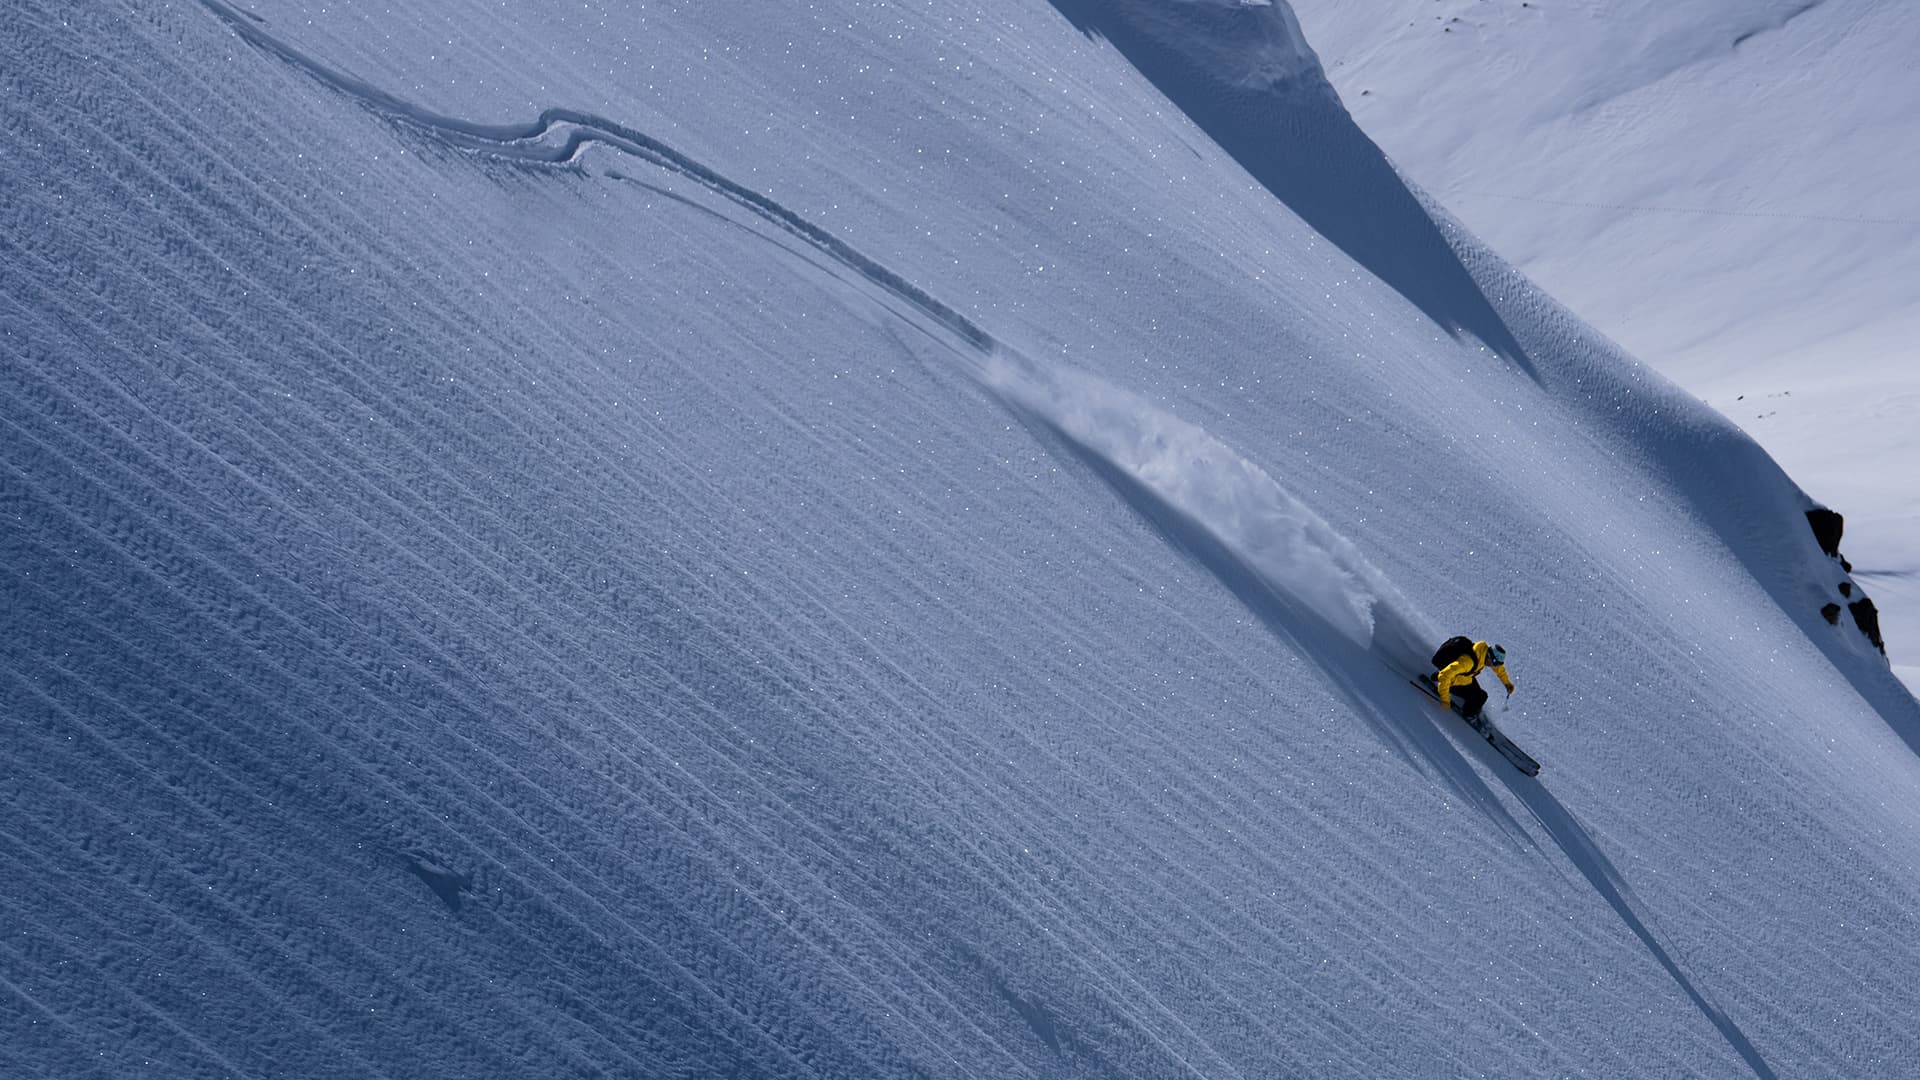 Departures Magazine: Heli-skiing in Greenland with EYOS